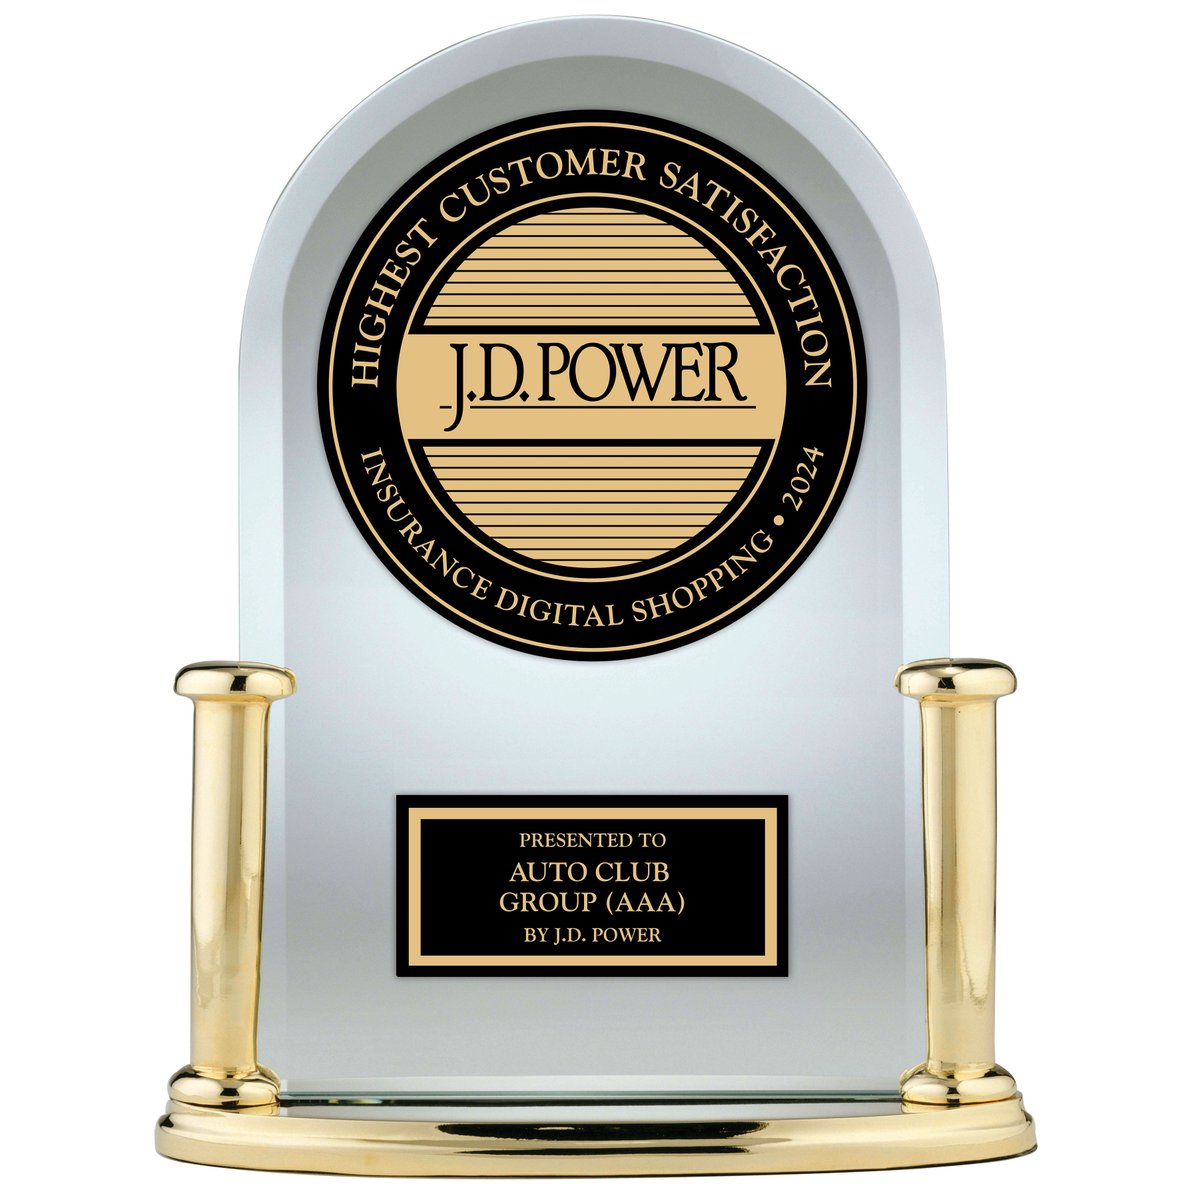 We’re honored! We've been ranked #1 by J.D. Power for our “Digital Insurance Shopping Experience.” Thank you to our dedicated team and valued members for helping us achieve this recognition. 

More here: bit.ly/44VprZJ
#JDPower #DigitalExcellence #Insurance